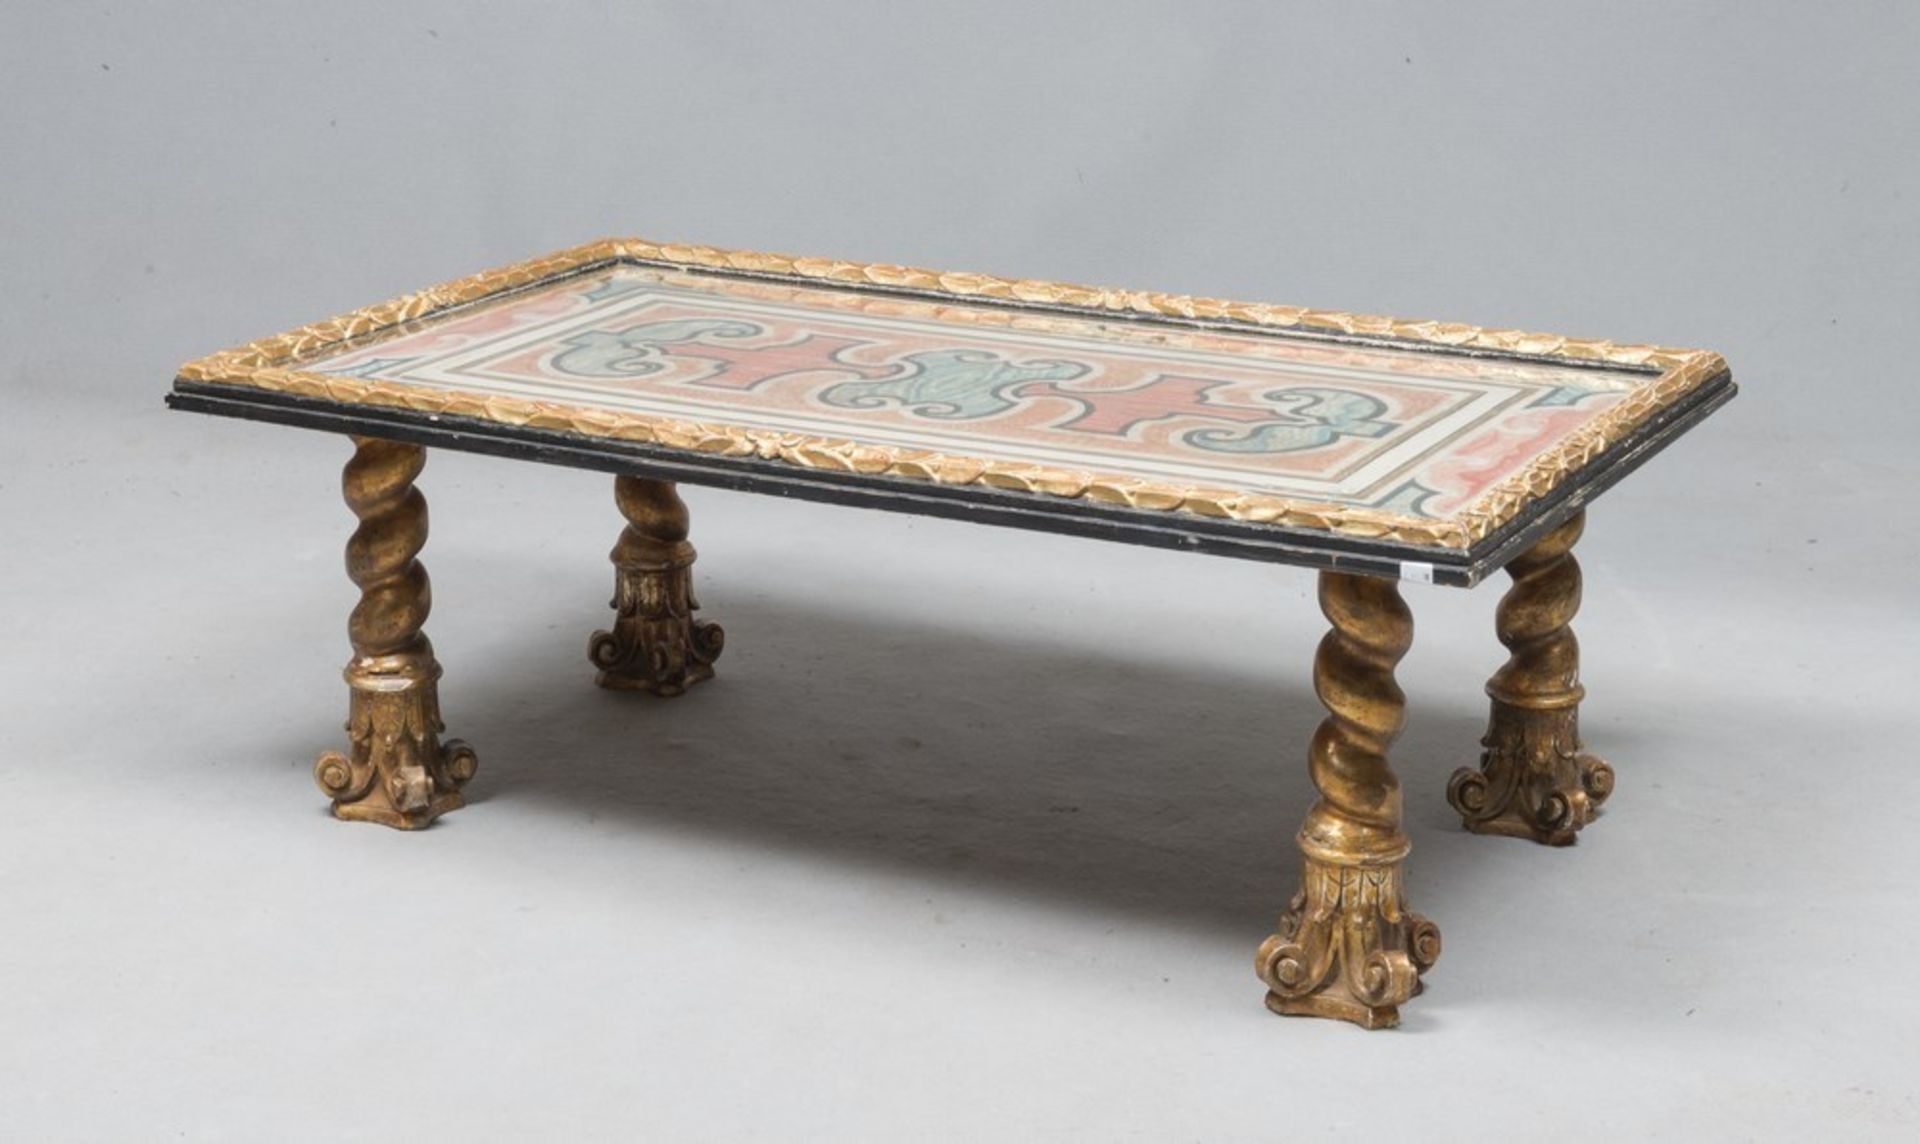 LAQUERED WOOD TABLE, ANTIQUE ELEMENTS ornaments in polychrome and fake marbles. Lace wreath frame,